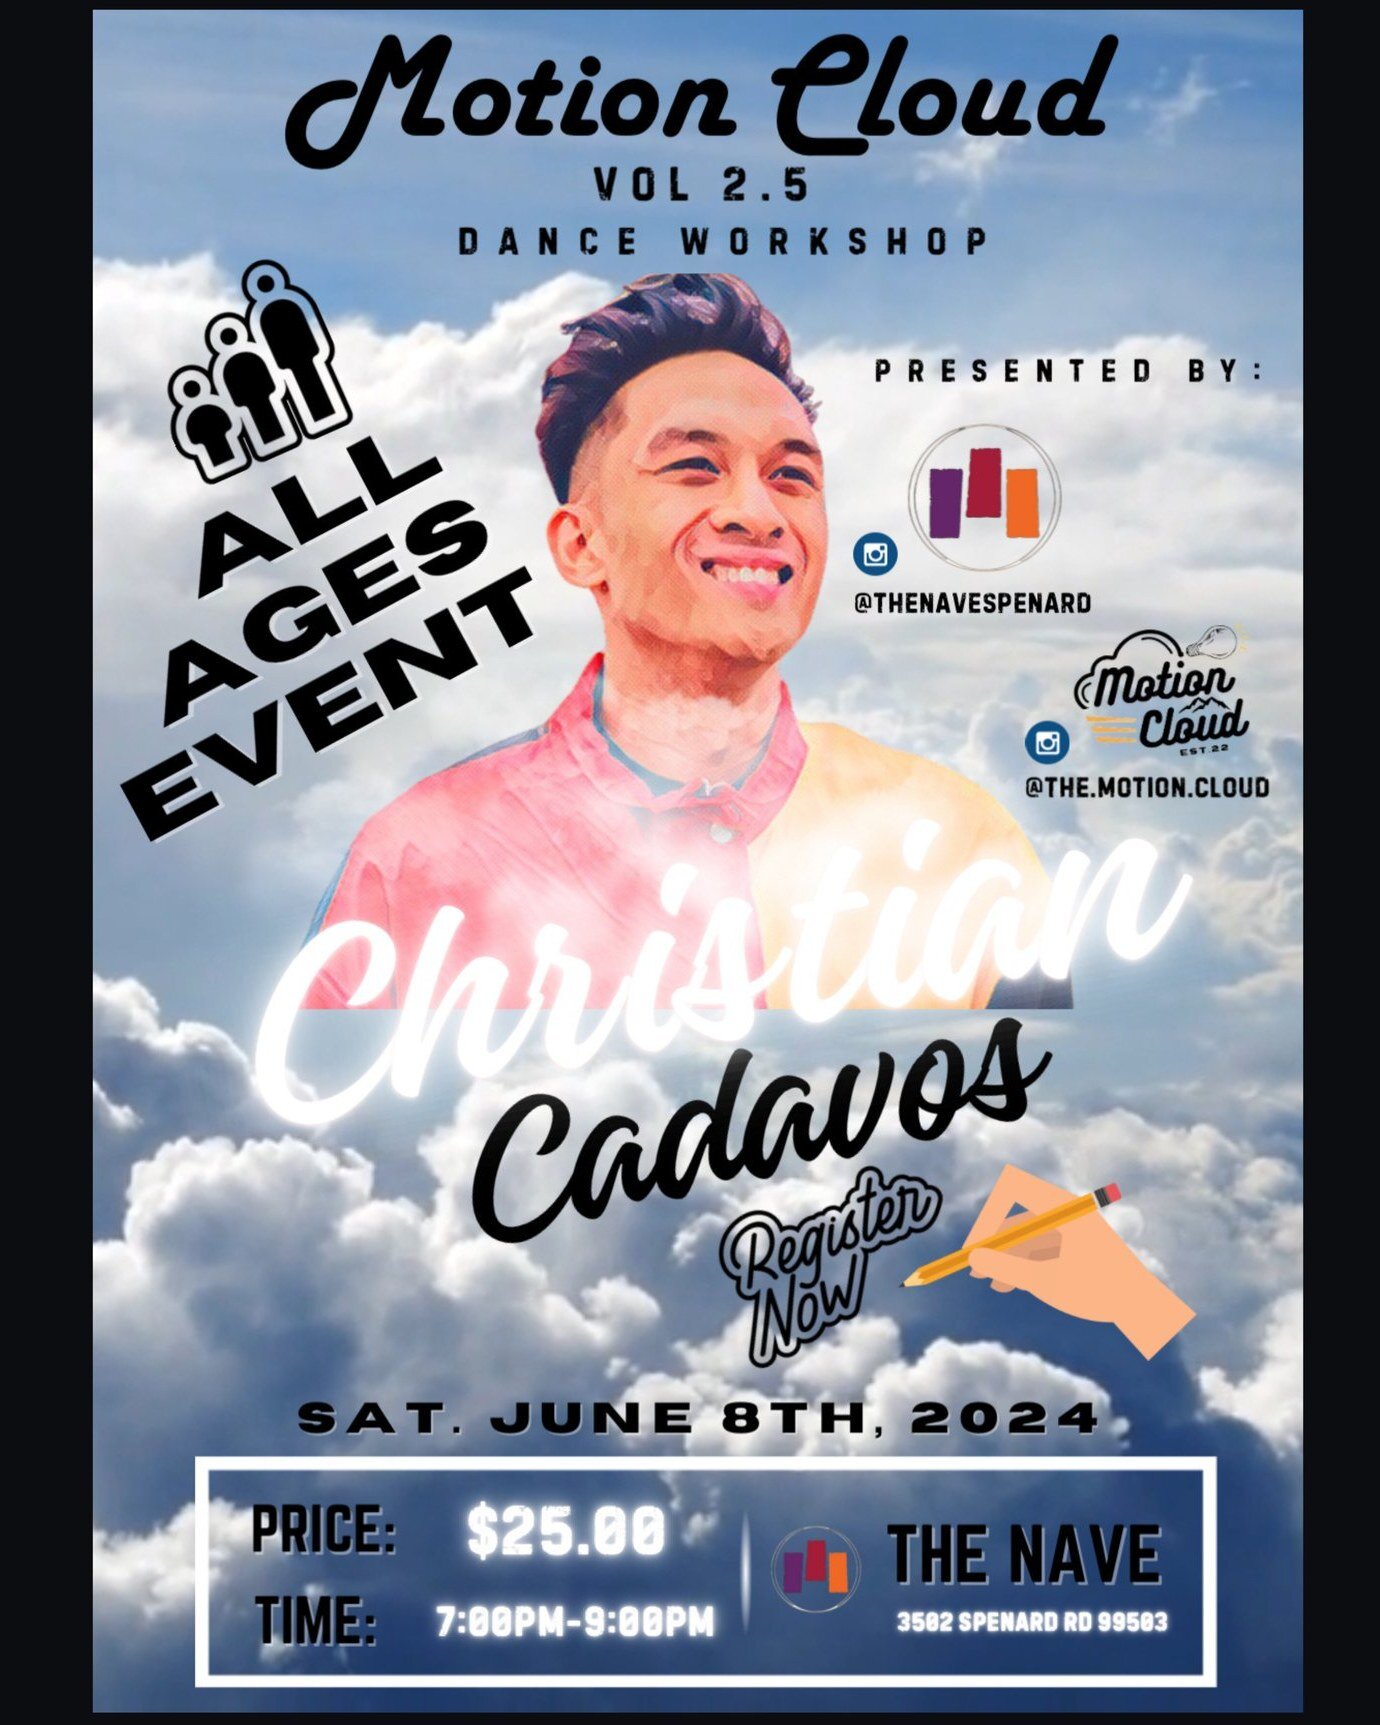 ✨ANNOUNCEMENT: This JUNE 8th, 2024, The Nave is partnering with local dance instructor Christian Cadavos, creative director of @the.motion.cloud for an all-ages, community dance class open to all experience levels! 

✨Visit the link in our bio to reg